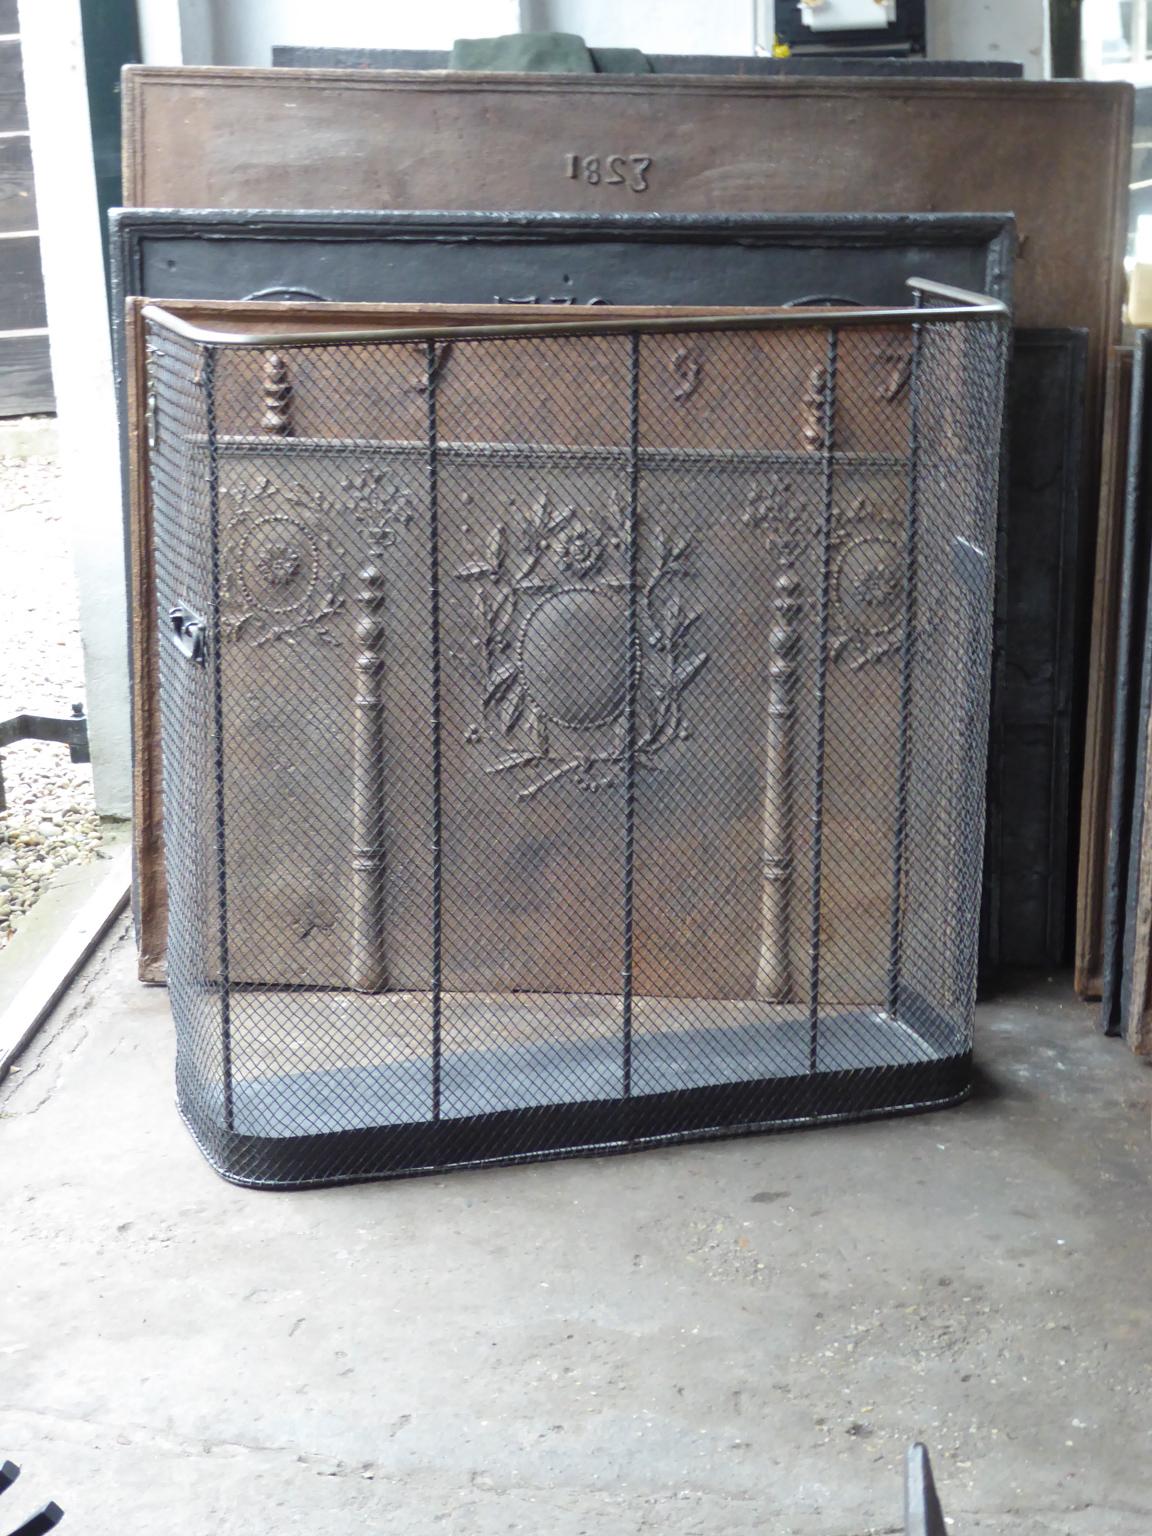 Large 19th century English Victorian fireguard, fireplace guard made of brass, iron and iron mesh. The fire guard is in a good condition and is fully functional.

All our products that weigh 66 kg / 146 lbs or more are shipped as standard